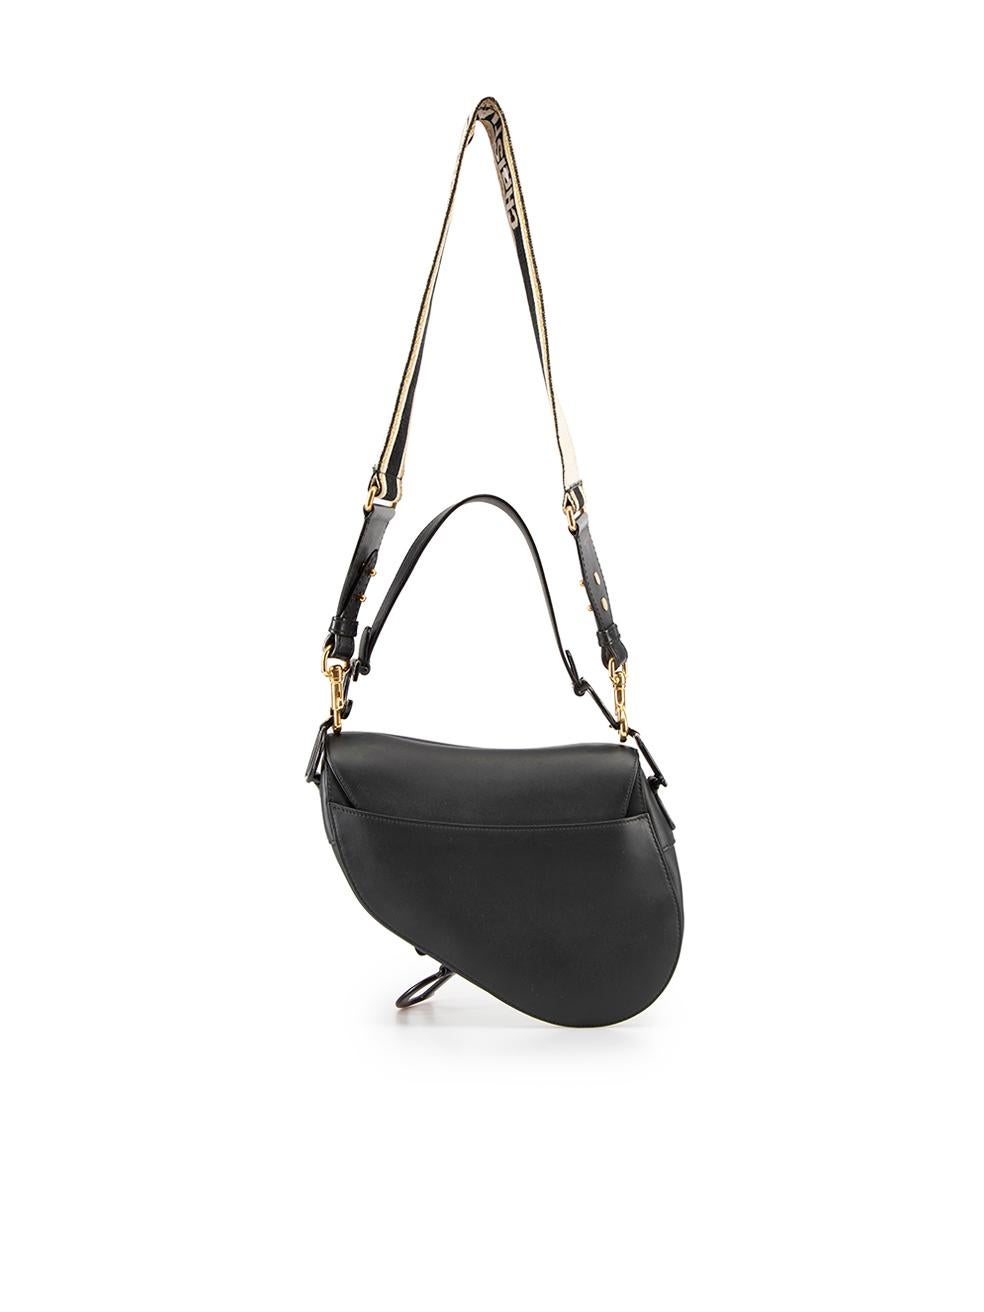 Dior Black Leather Saddle Bag In Good Condition For Sale In London, GB